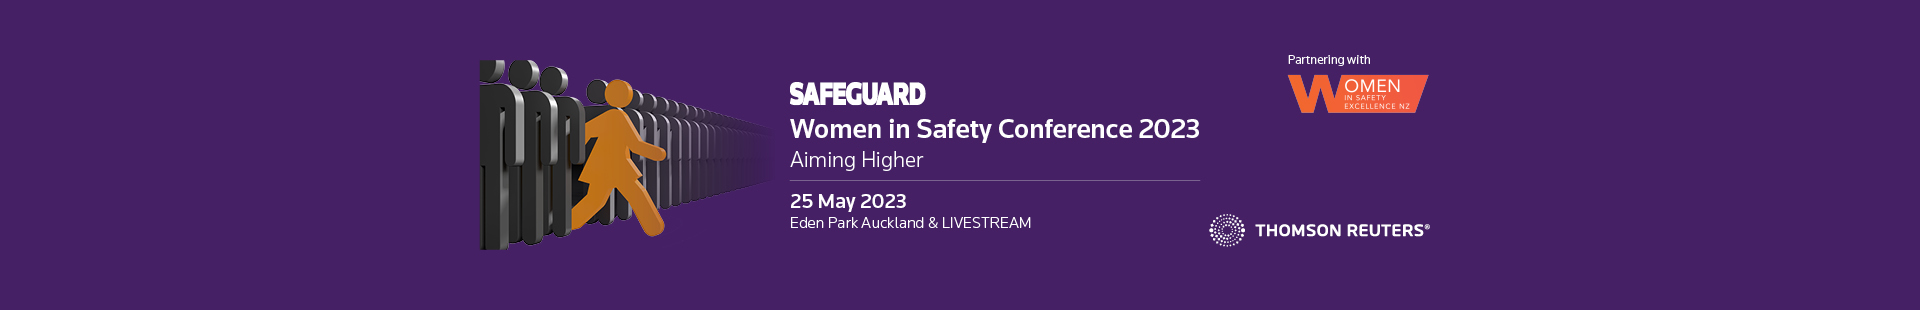 Women in Safety Conference 2023